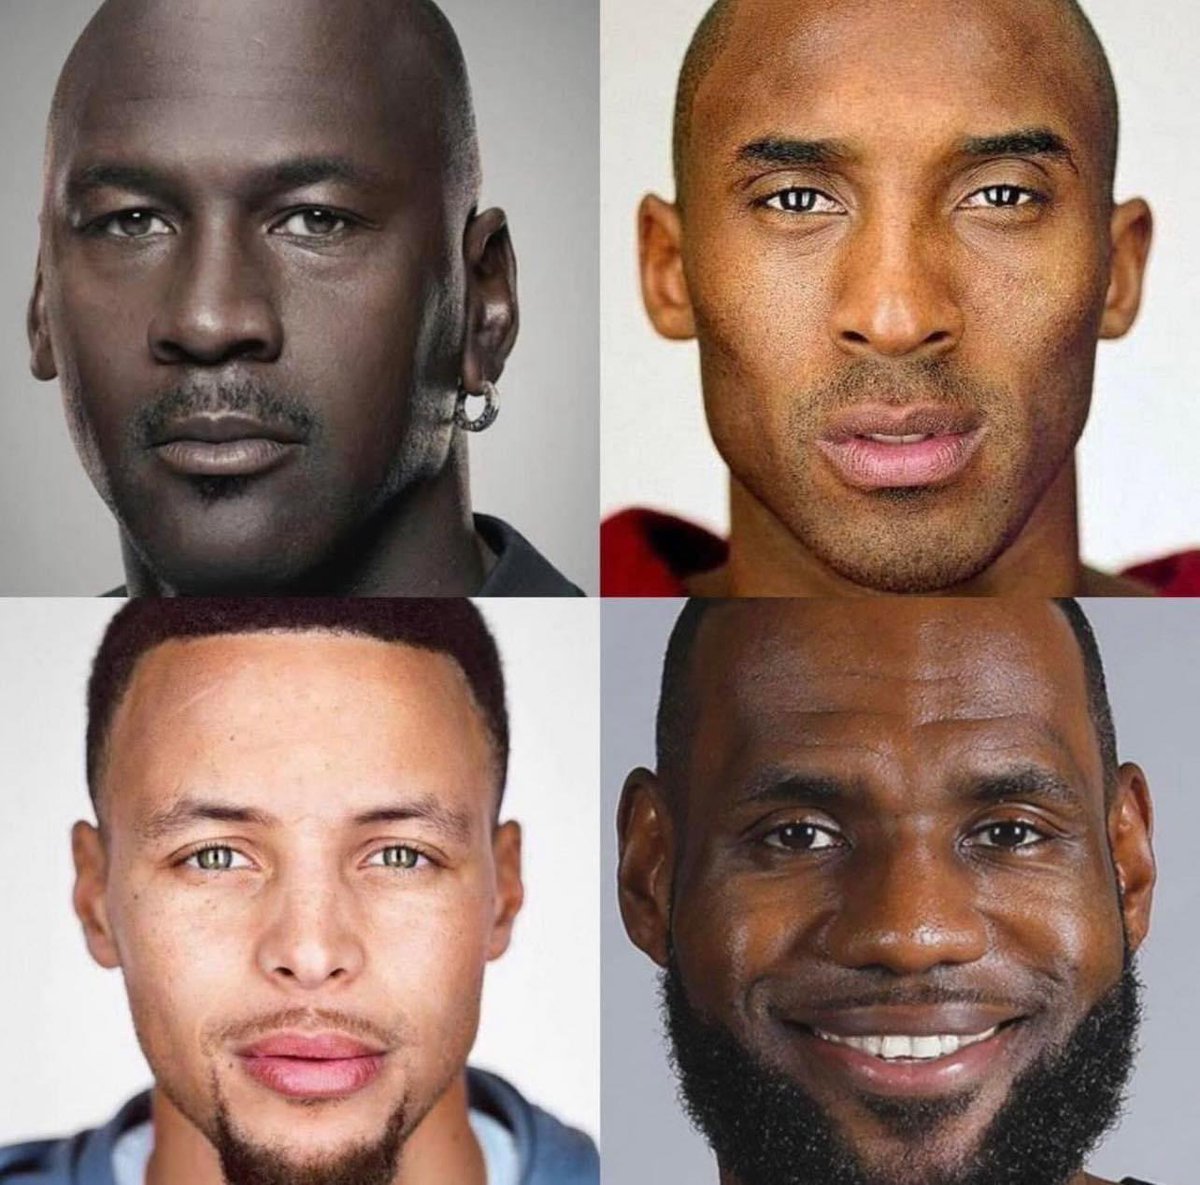 The 4 greatest players in NBA History.